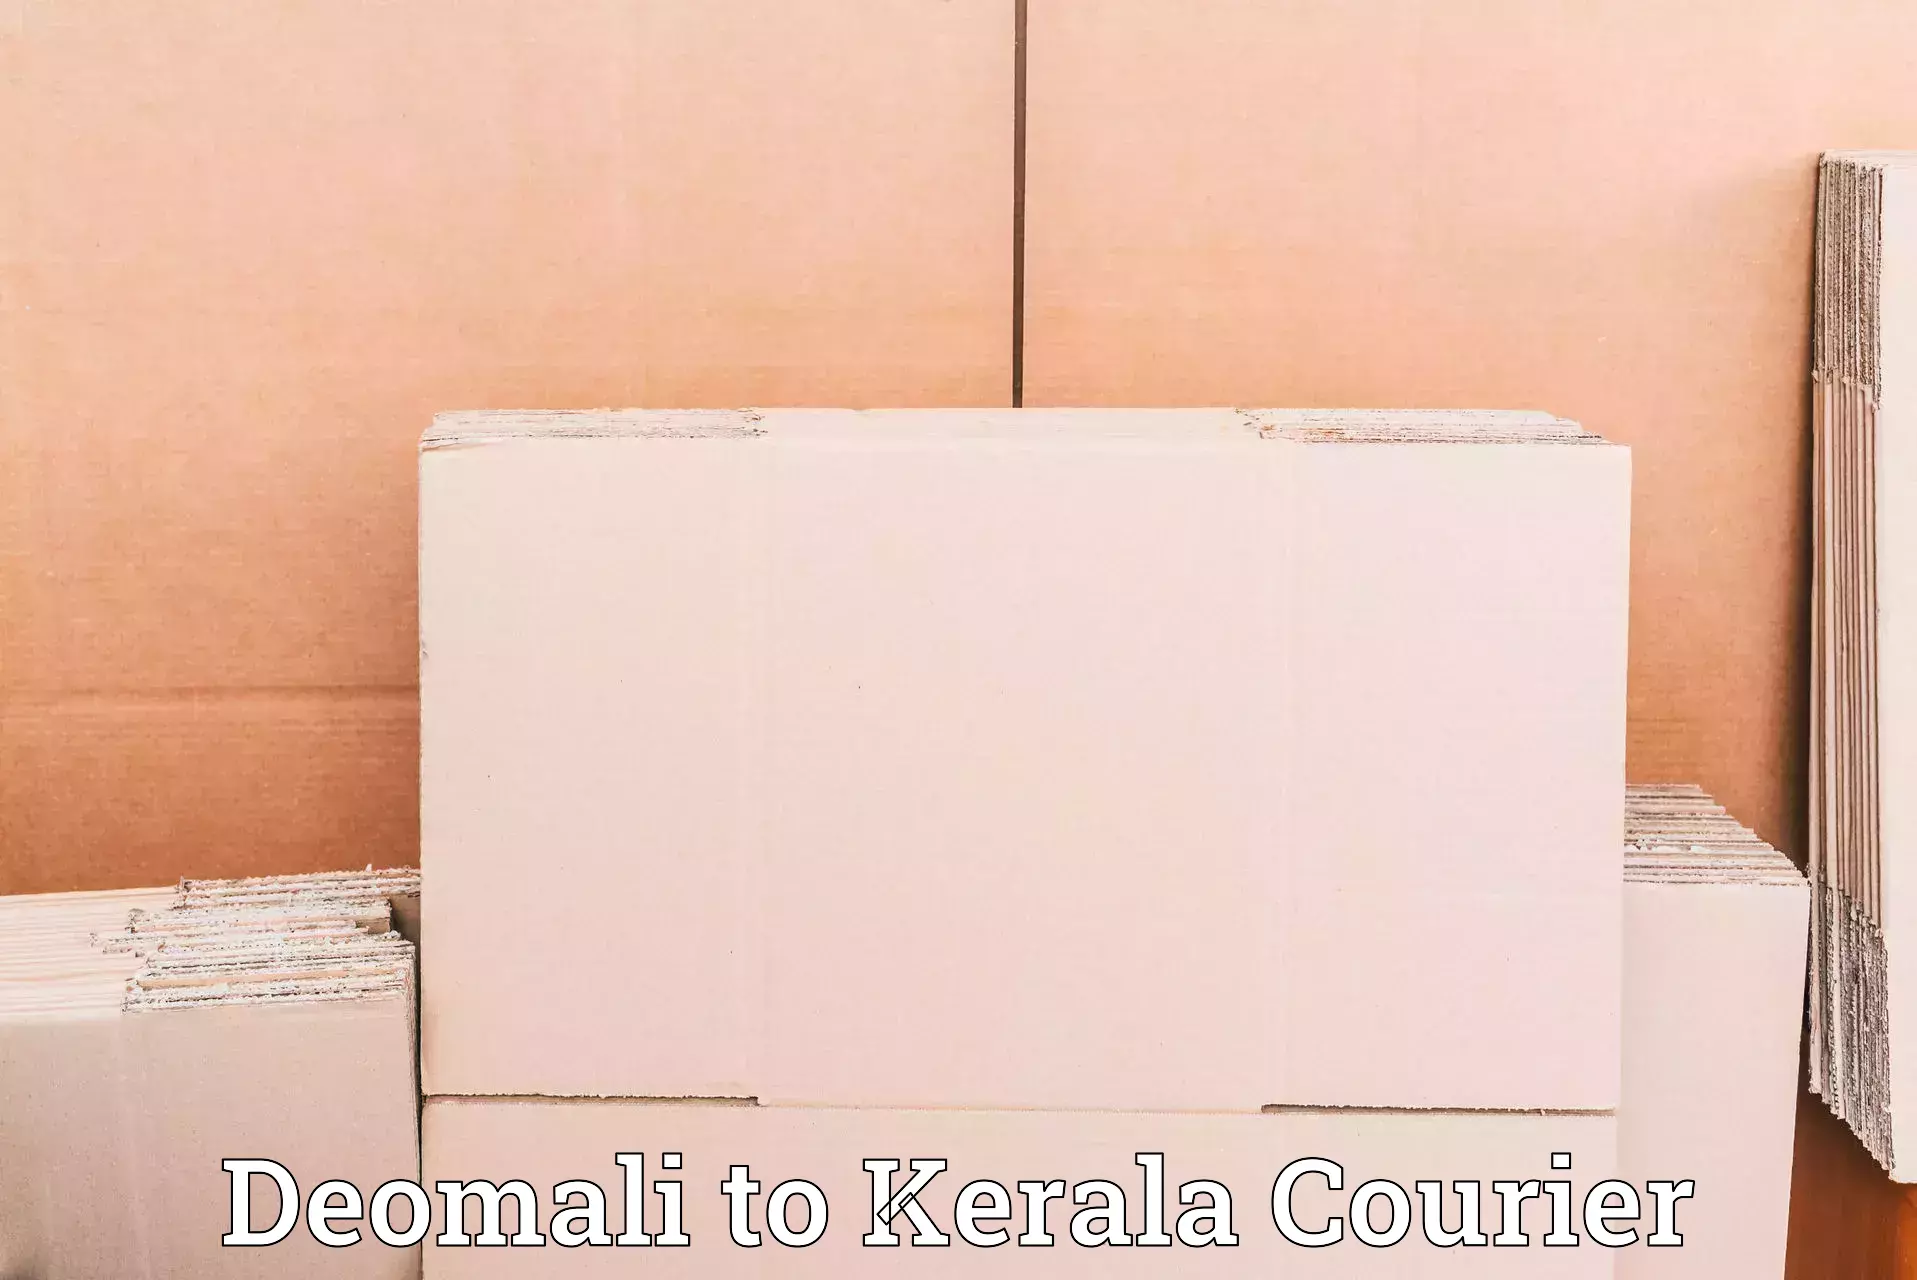 Nationwide shipping capabilities Deomali to Cochin University of Science and Technology